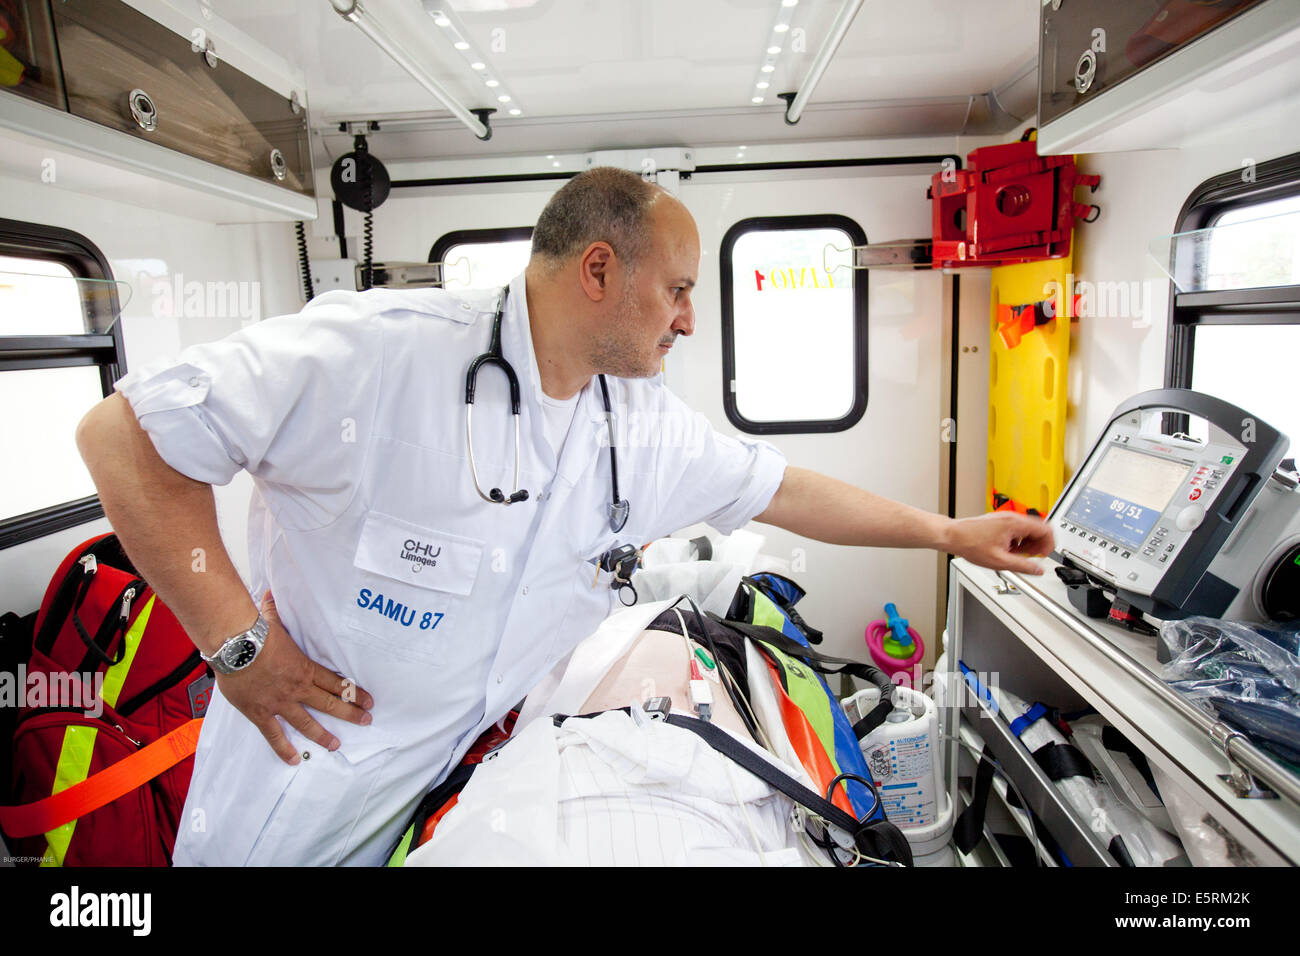 Cardiac monitoring in an ambulance, Emergency Medical Services, Limoges, France. Stock Photo